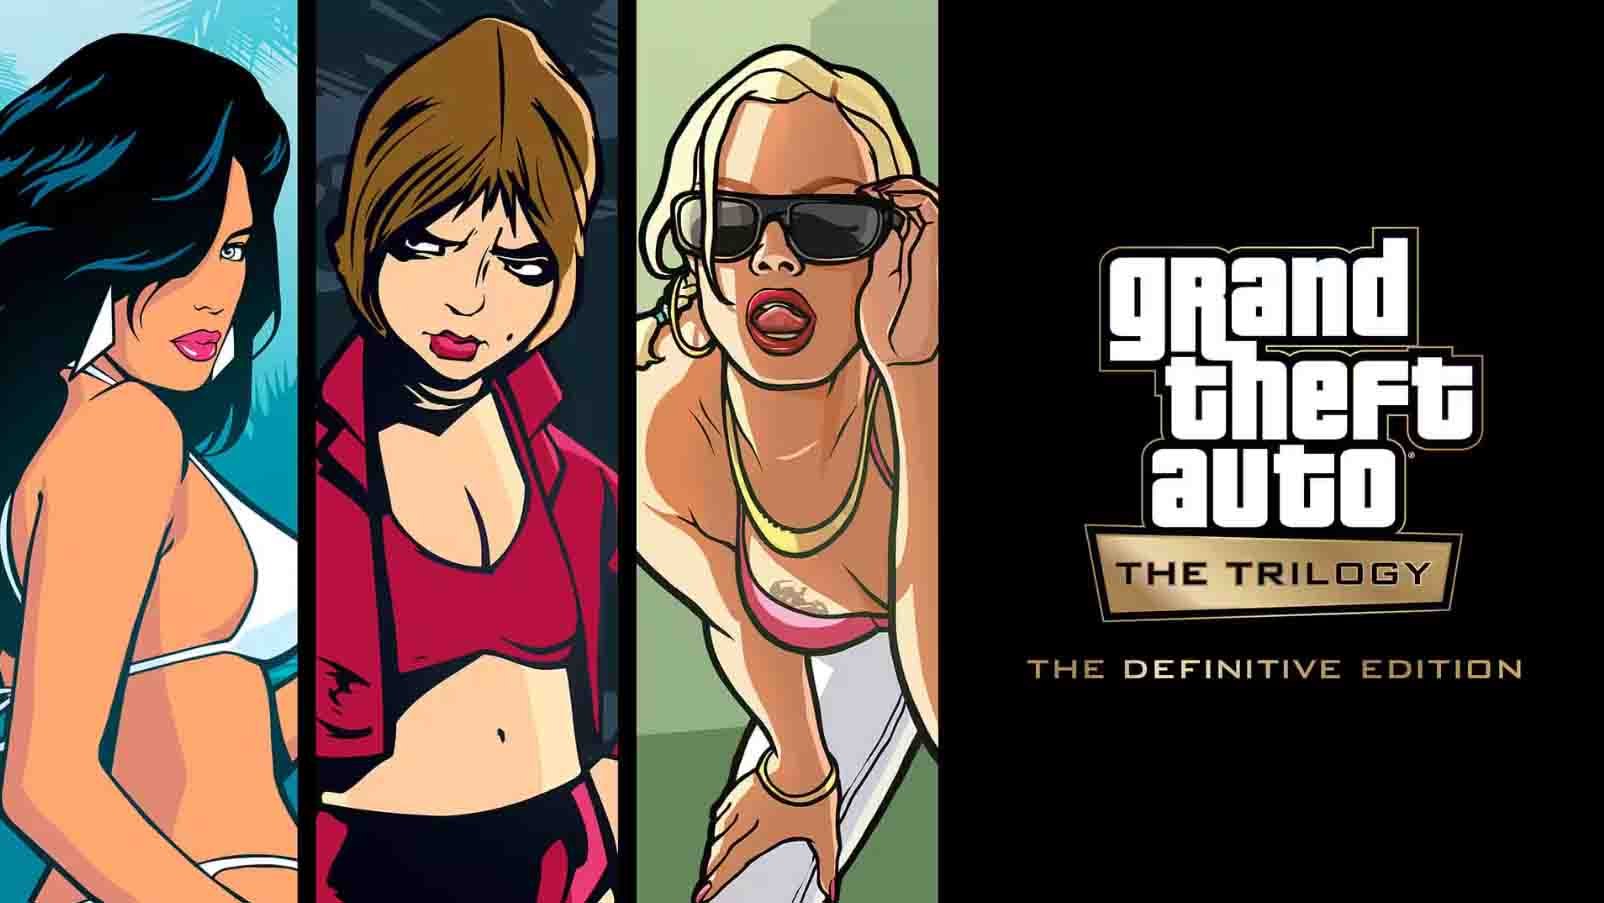 Grand Theft Auto: The Trilogy: The Definitive Edition (GTA) System Requirements for PC Games minimum, recommended specifications for Windows, macOS. & Linux.